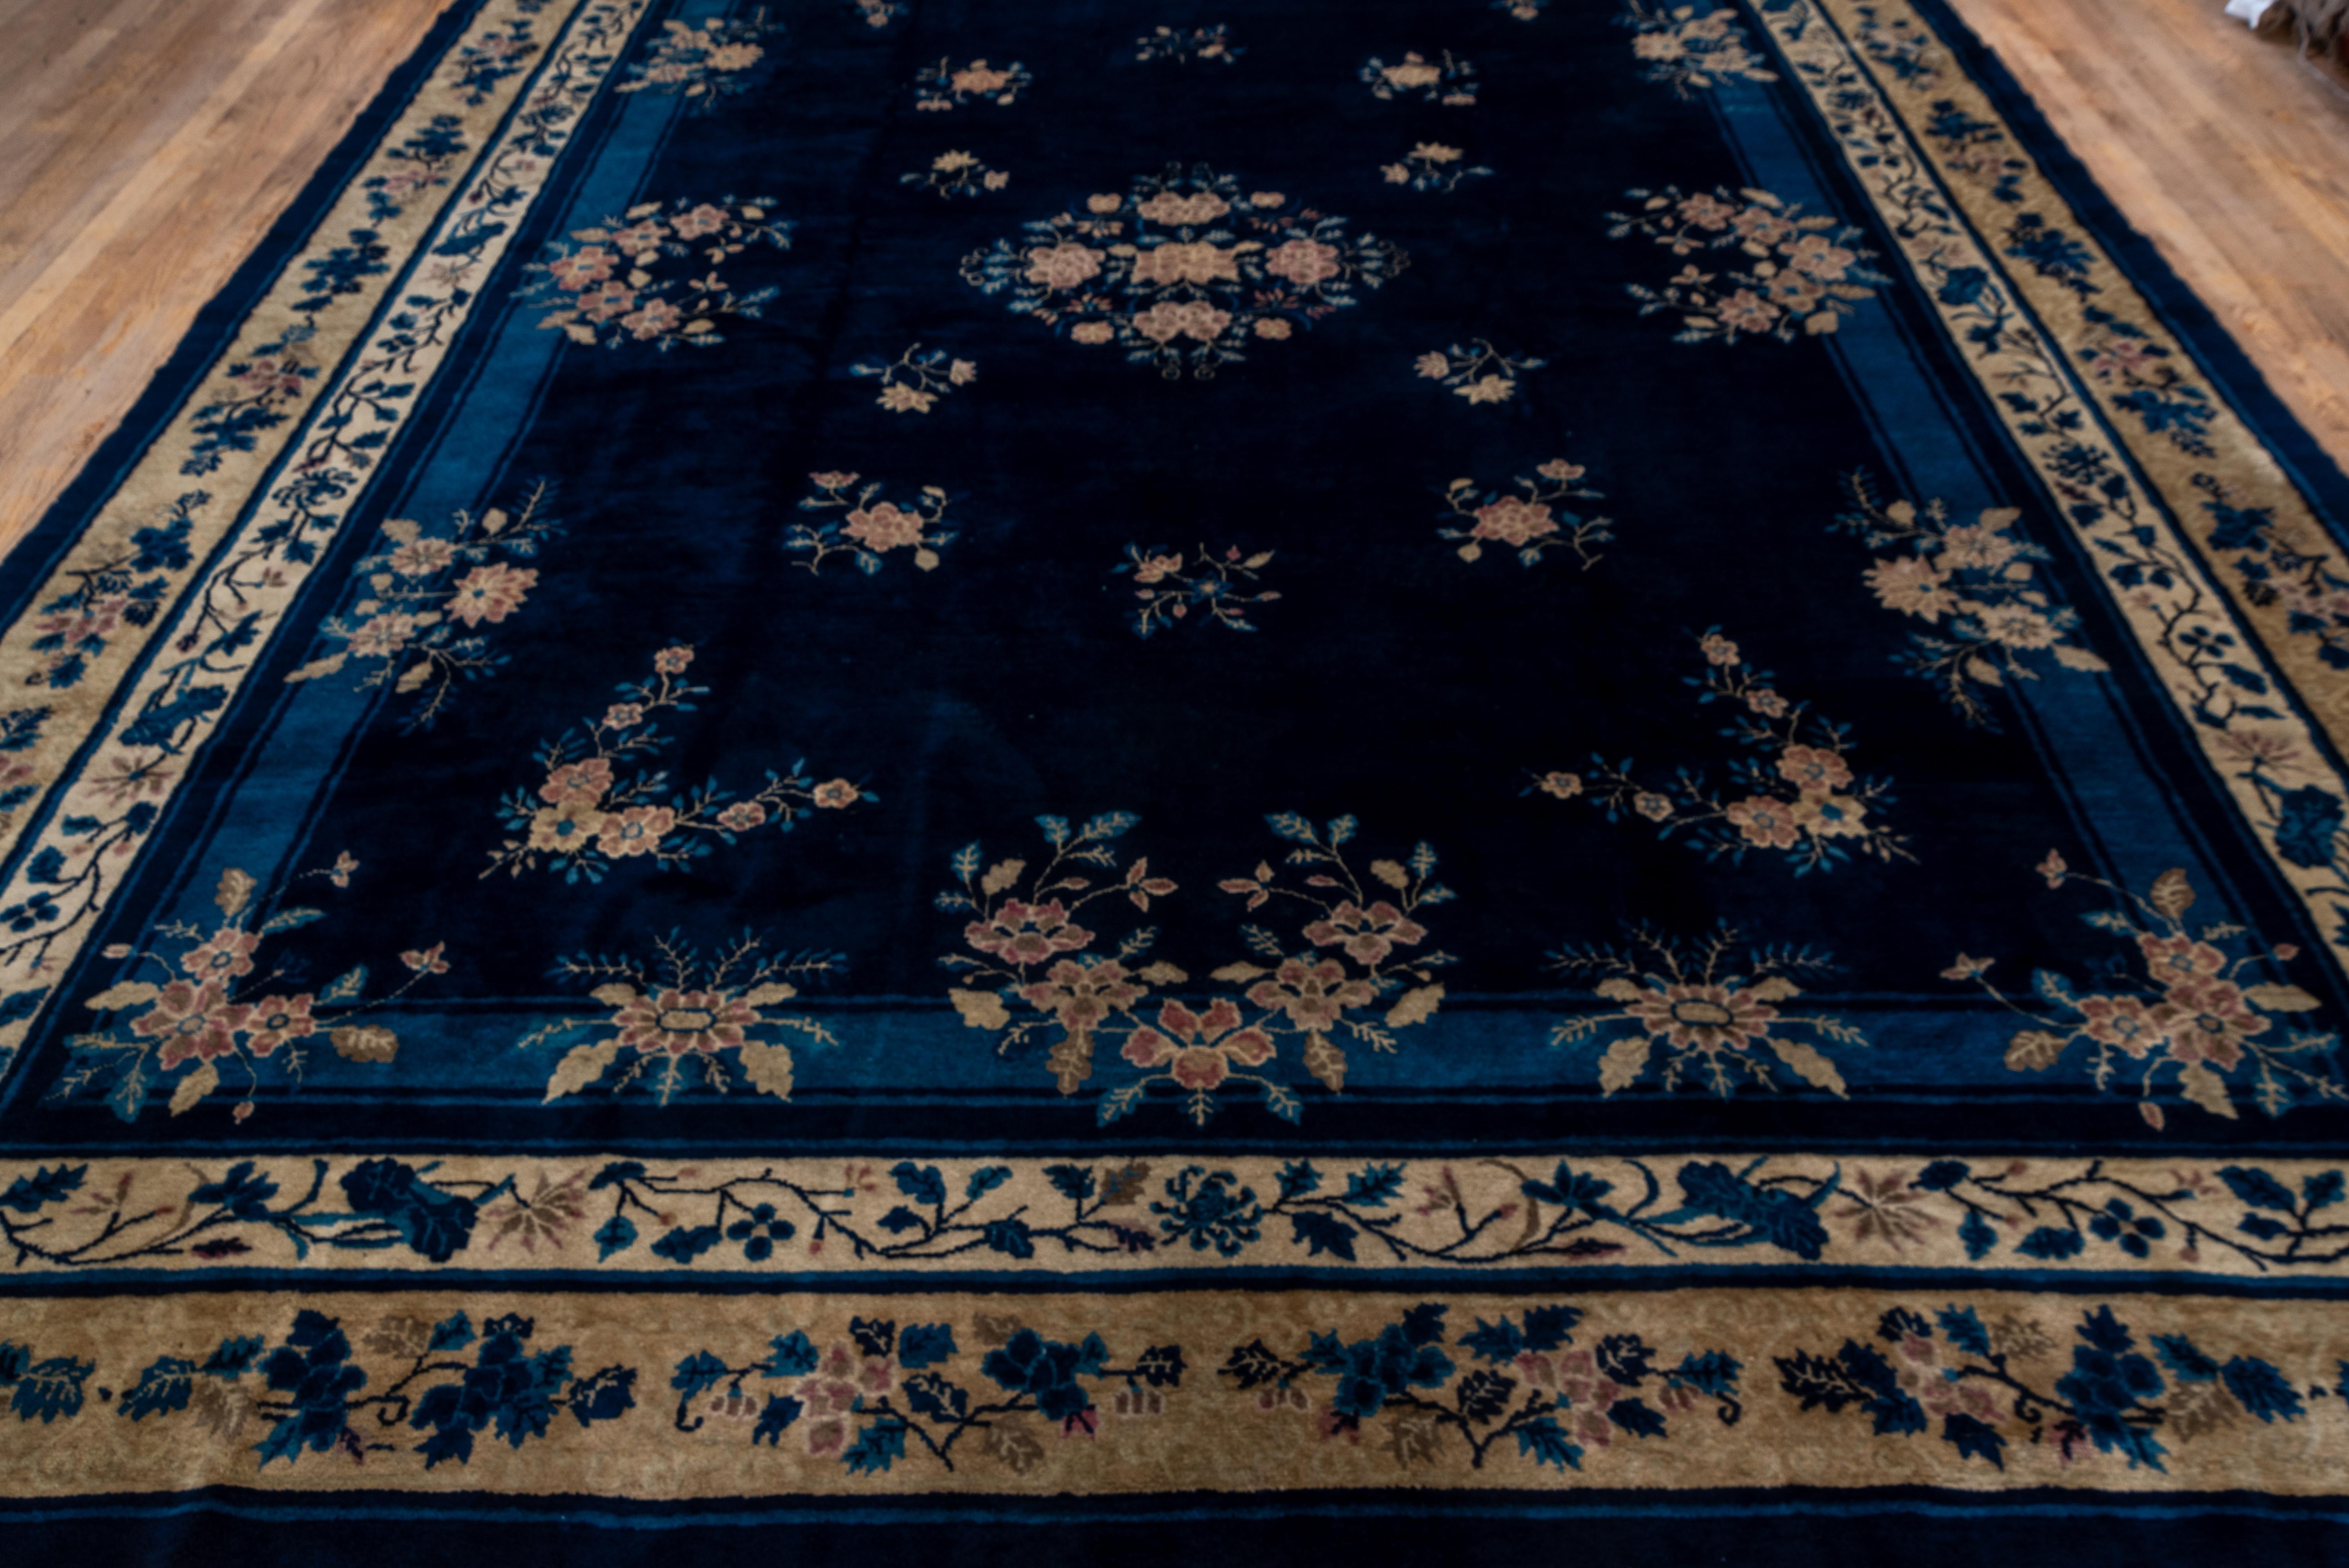 Chinese Export Antique Chinese Peking Carpet, Blue Field